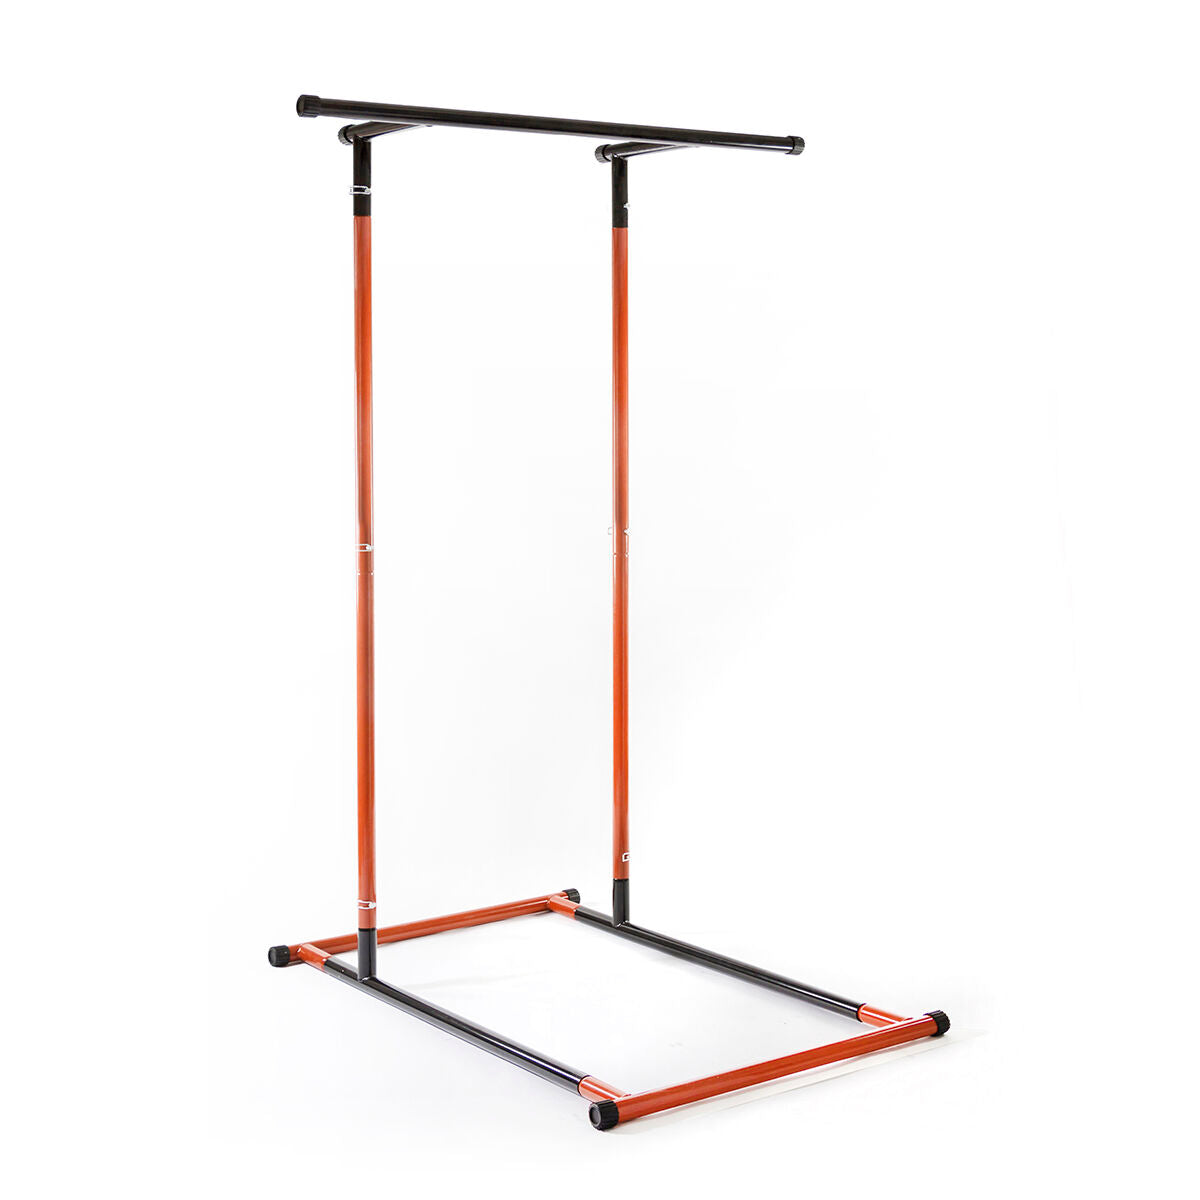 InnovaGoods Full Body Pull-Up Station with Exercise Guide